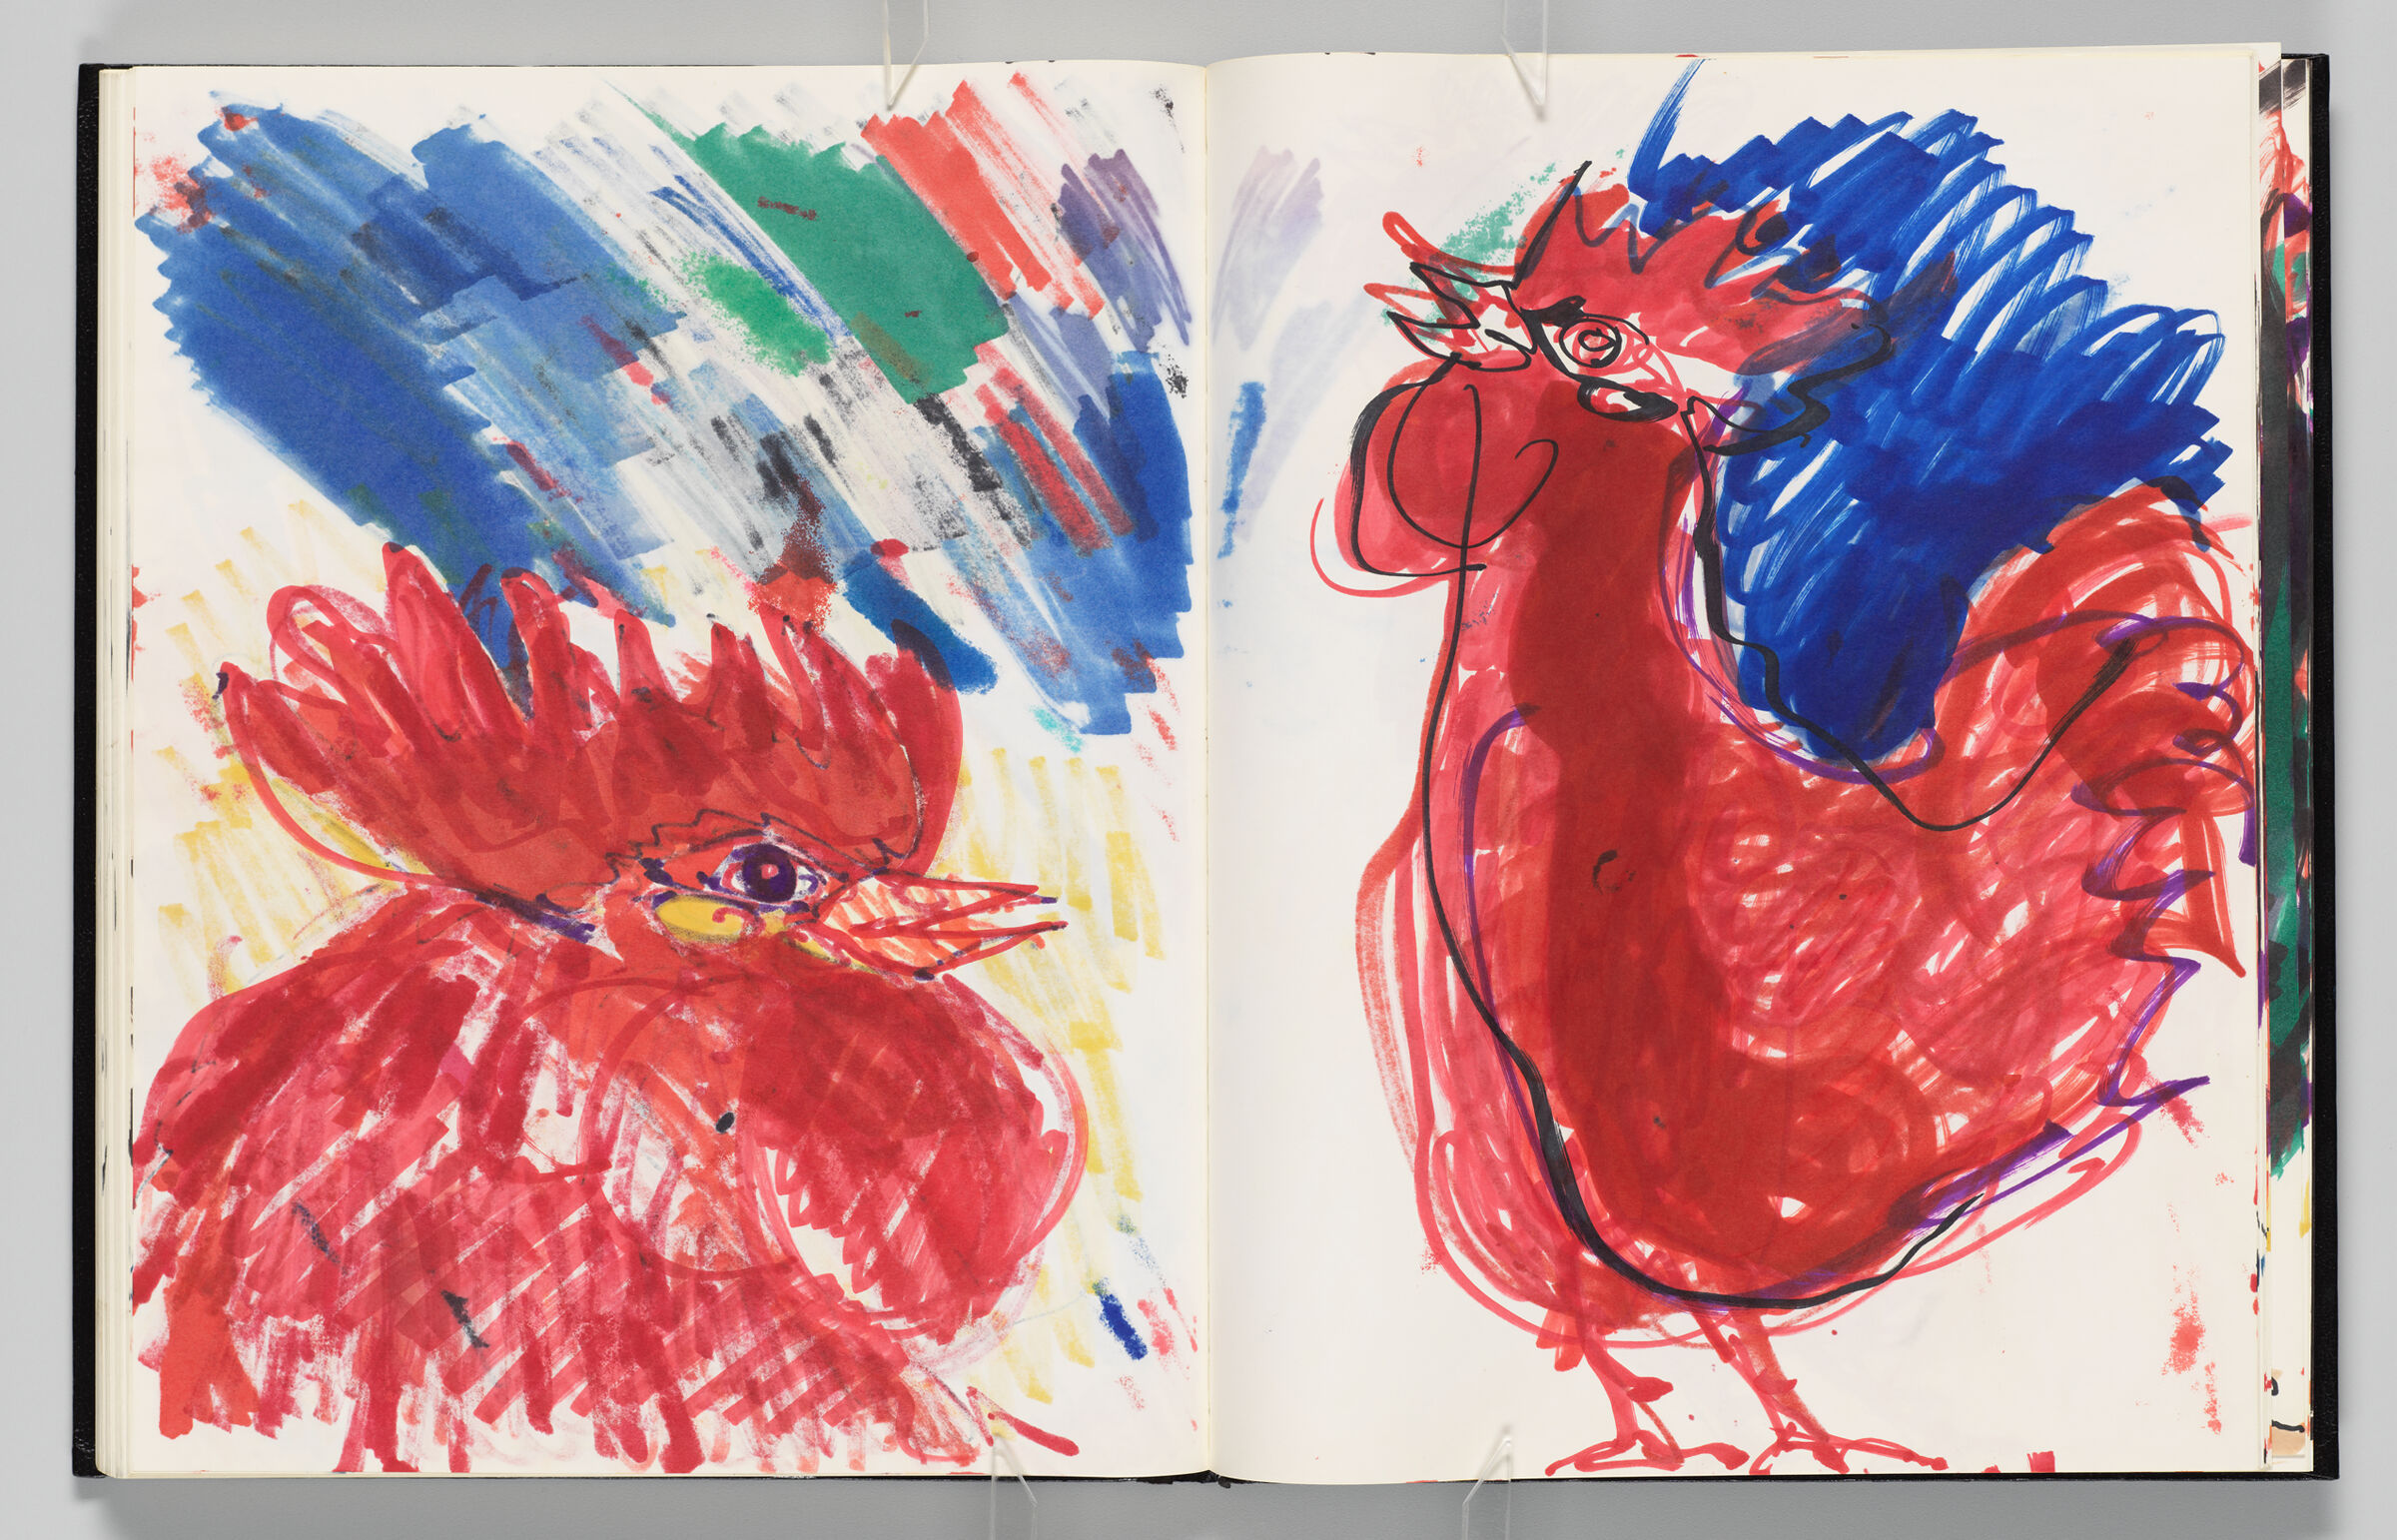 Untitled (Bleed-Through Of Previous Page, Left Page); Untitled (Rooster, Right Page)